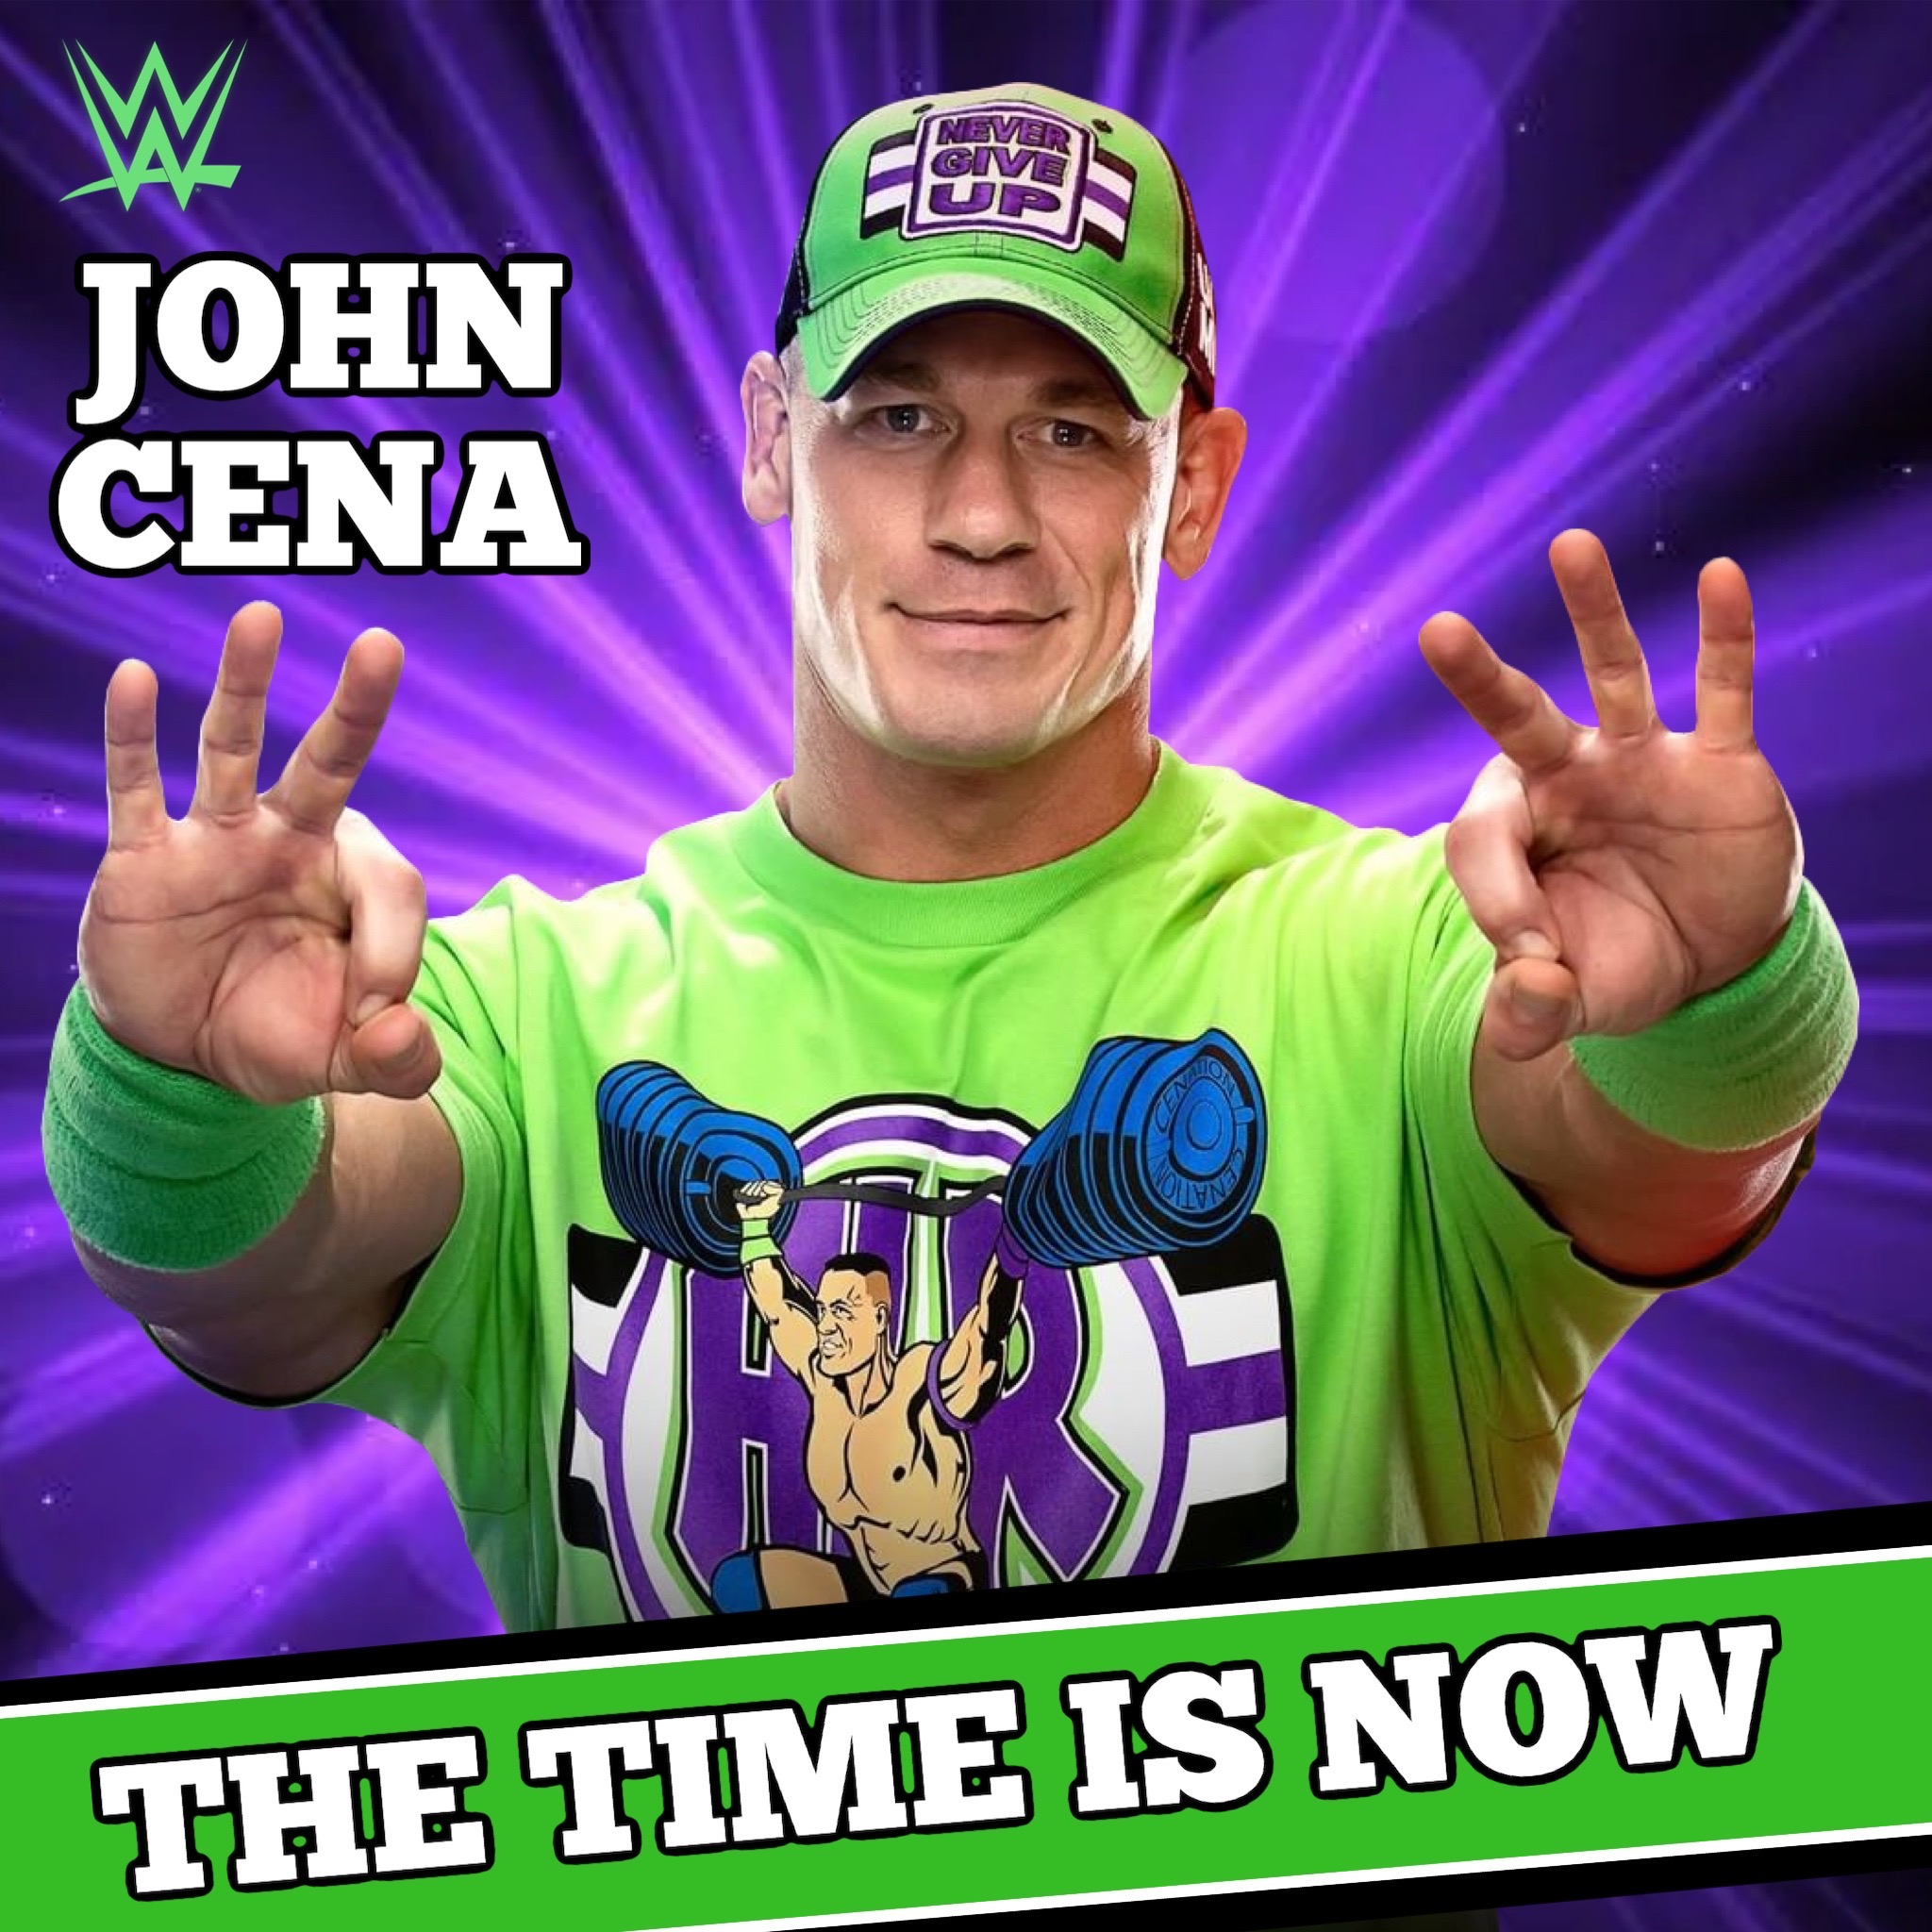 The time is now john cena system 51 swatch